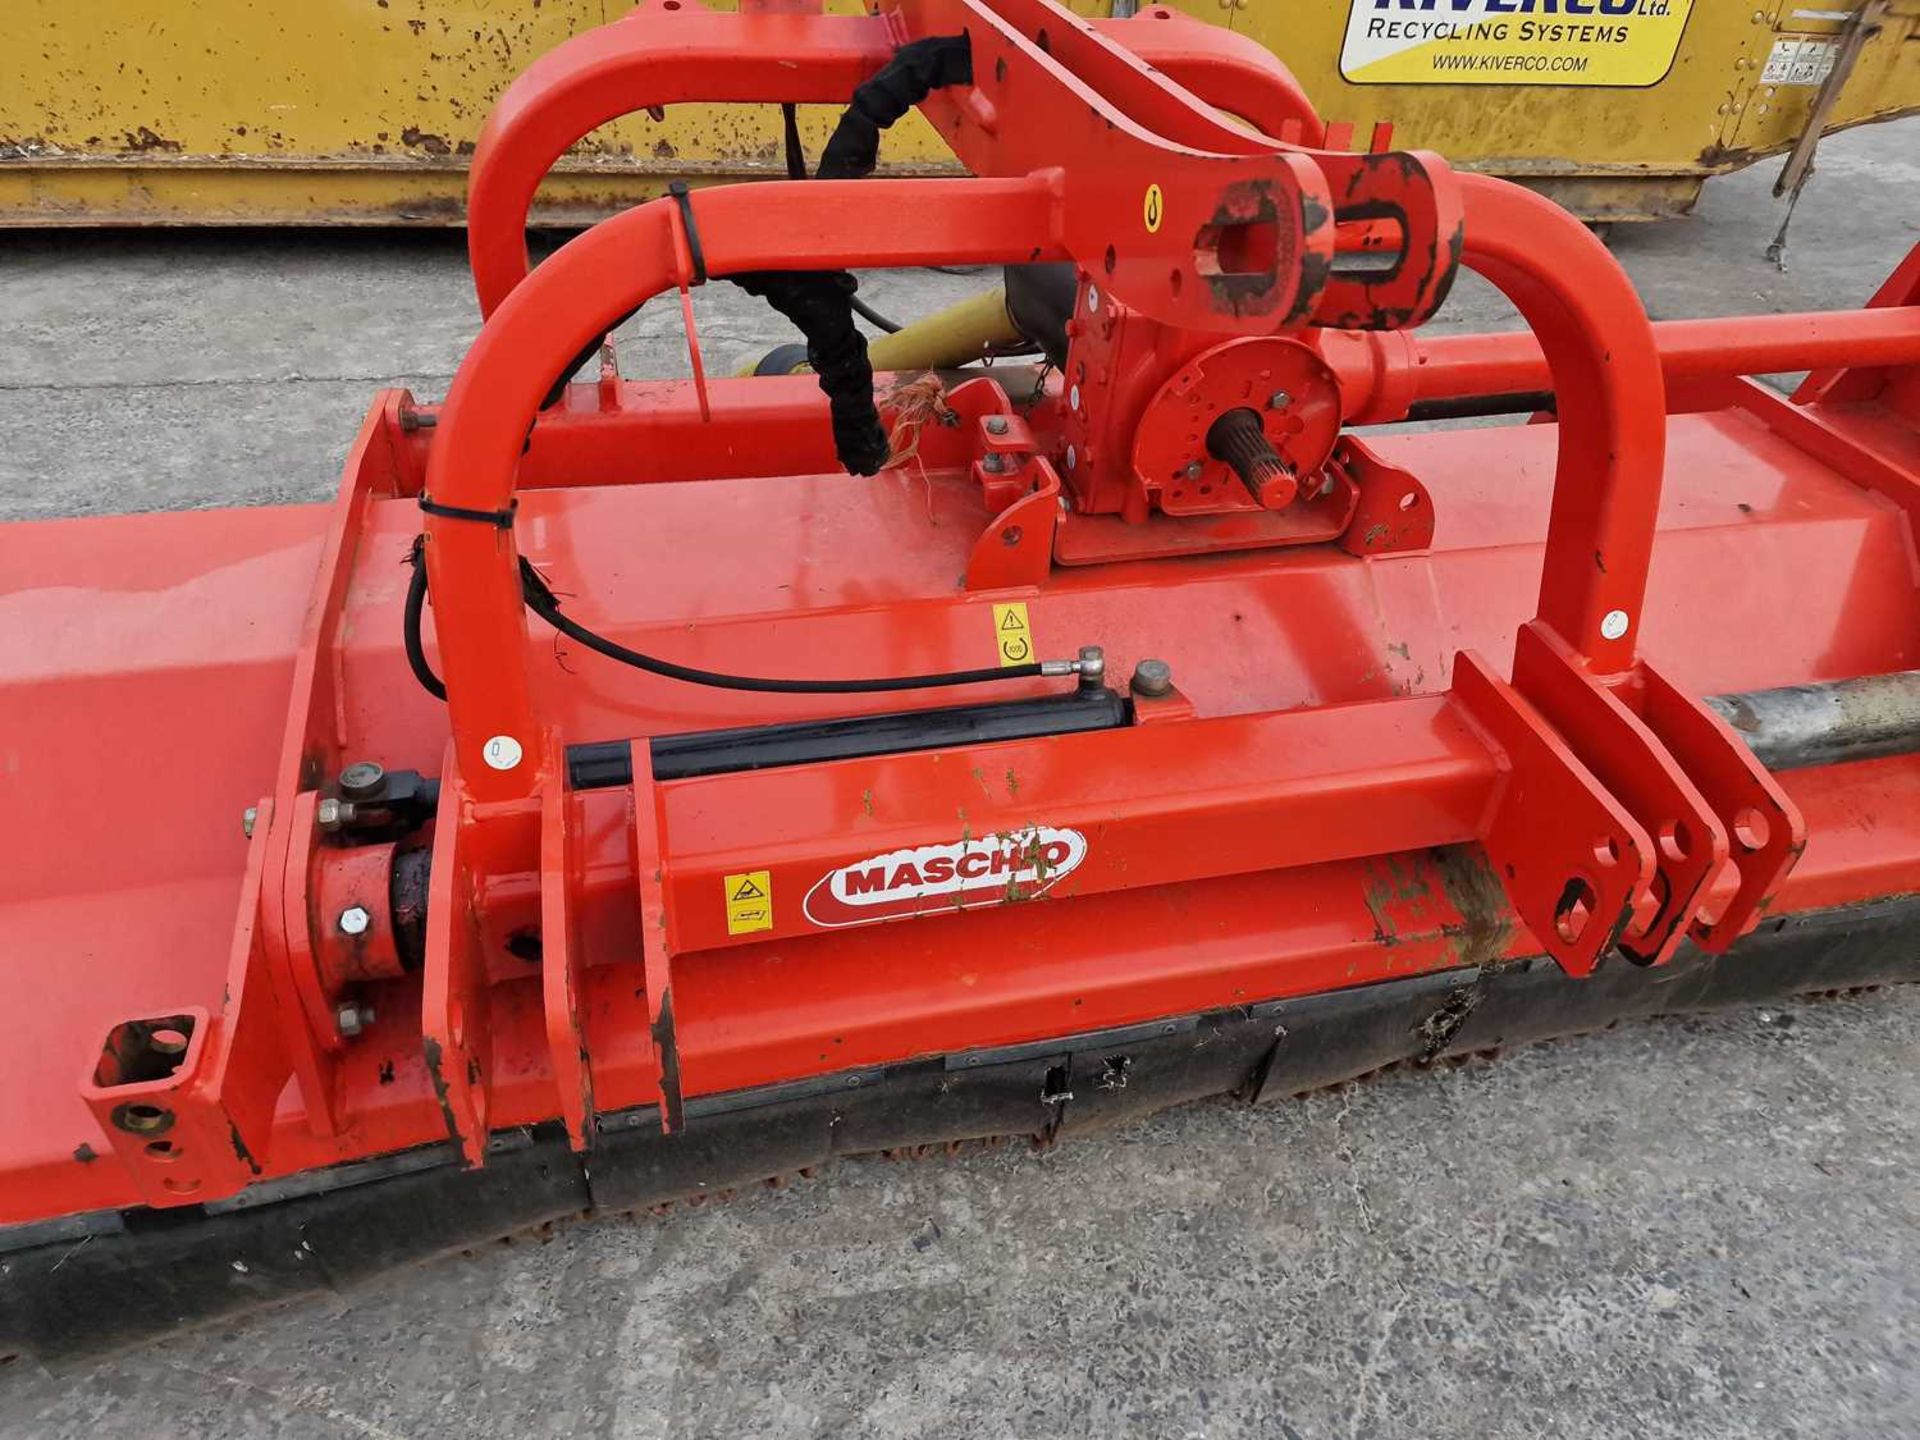 2018 Maschio Bufalo 280 PTO Driven Topper, Side Shift to suit 3 Point Linkage - Image 5 of 11